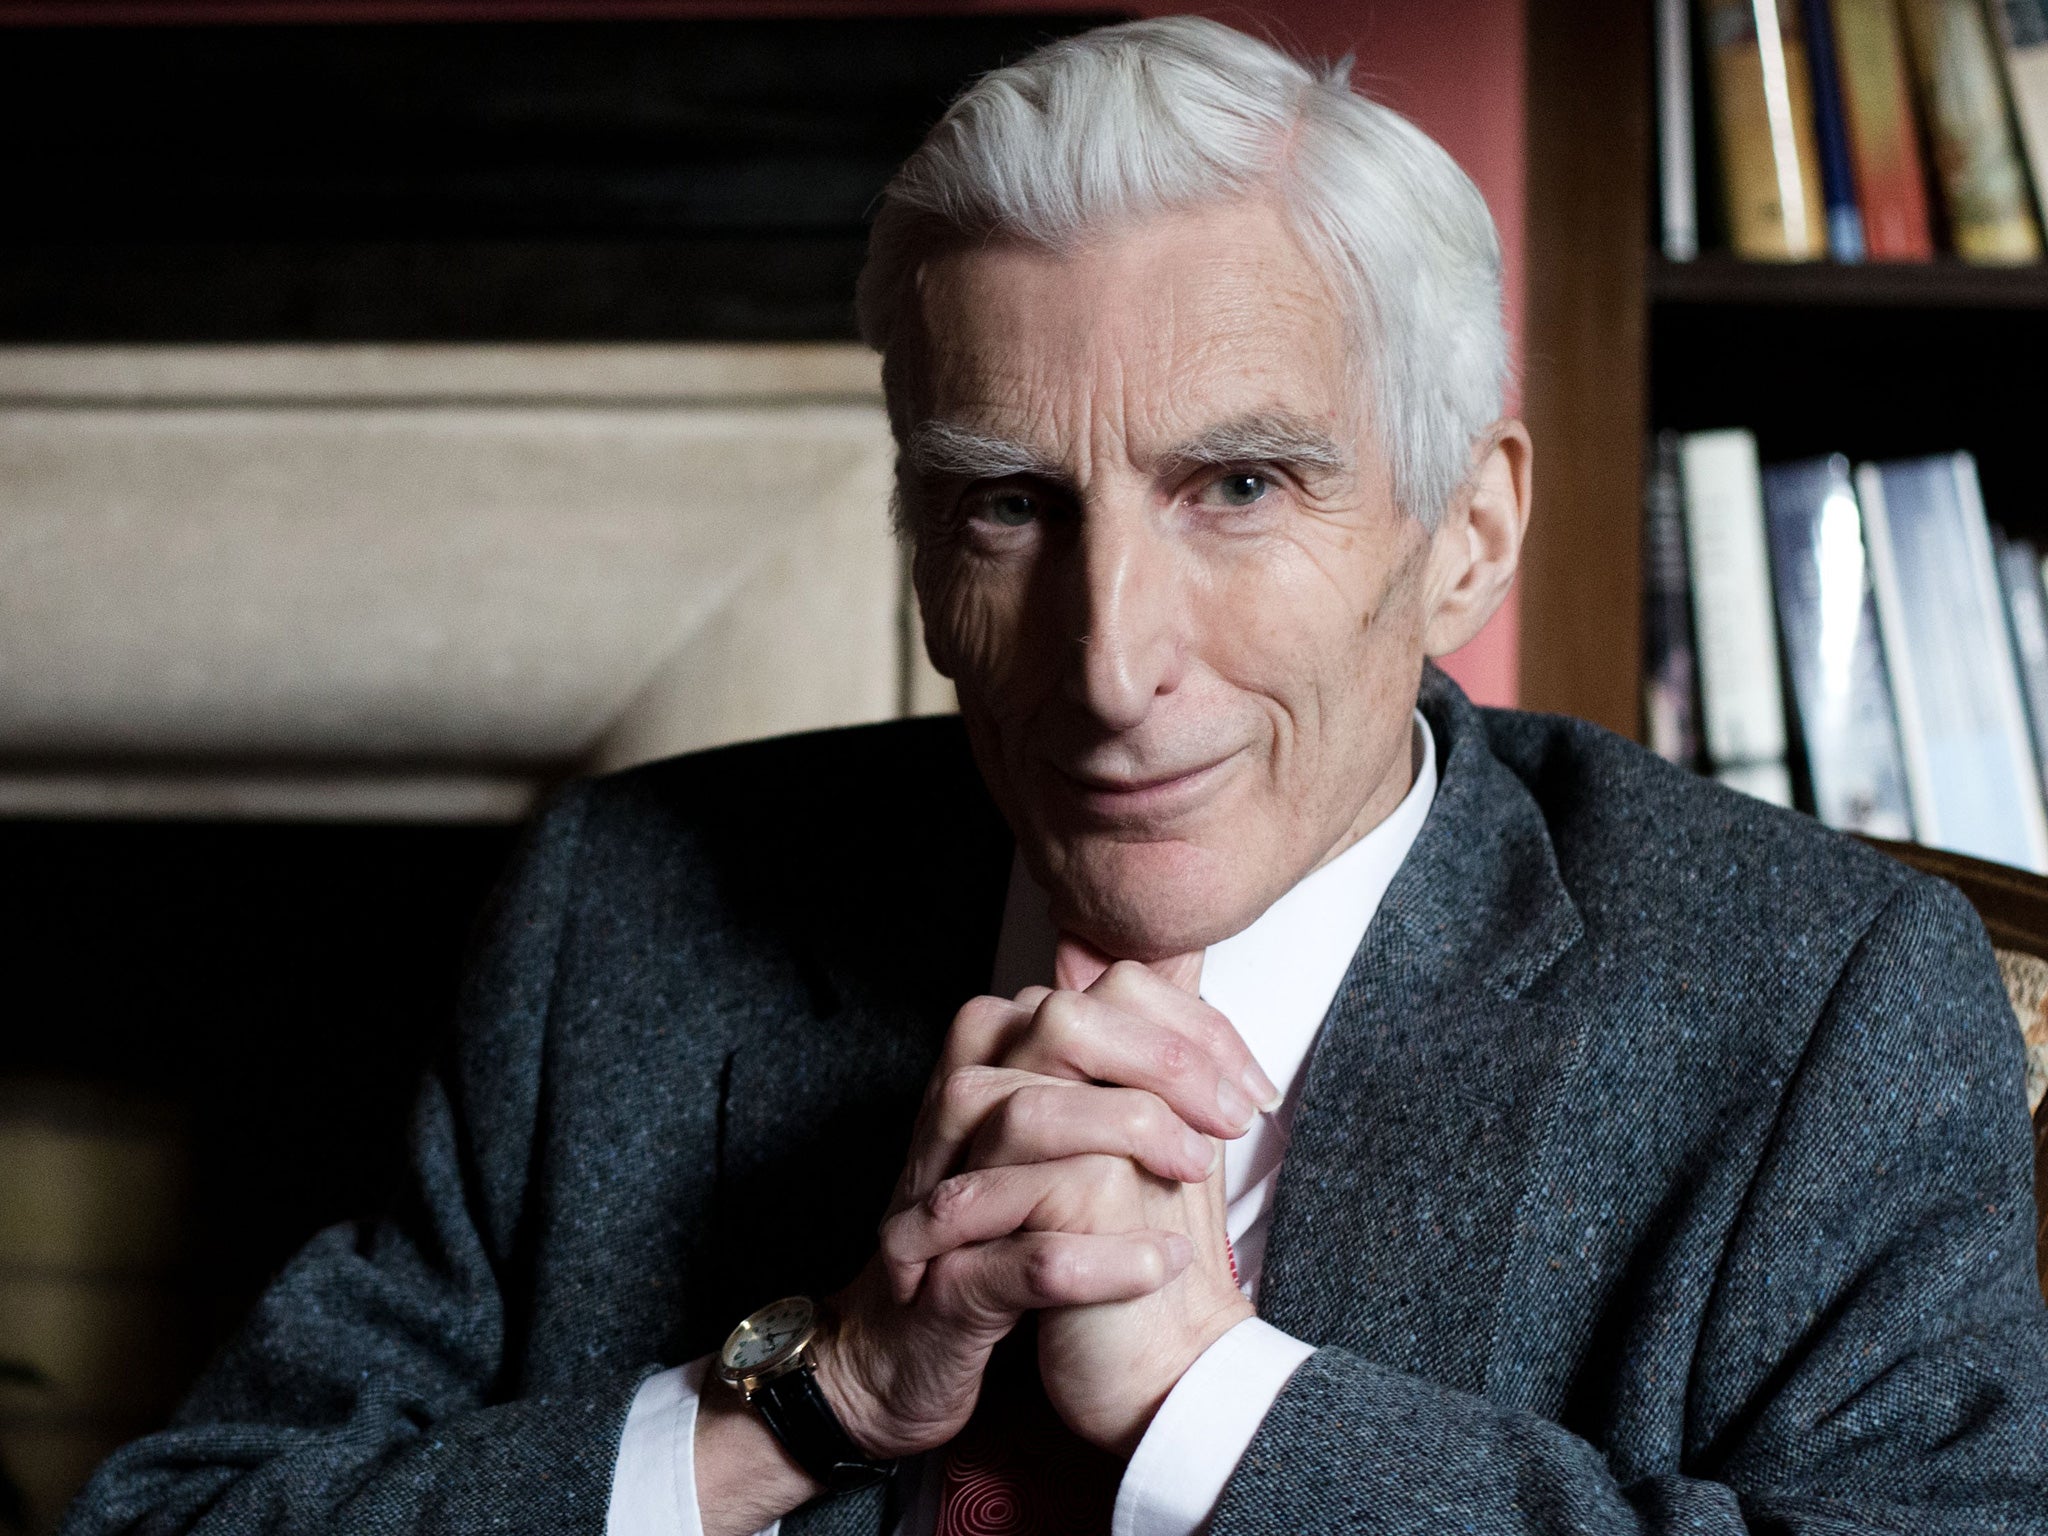 Martin Rees is planning a new battle to make students more scientifically literate